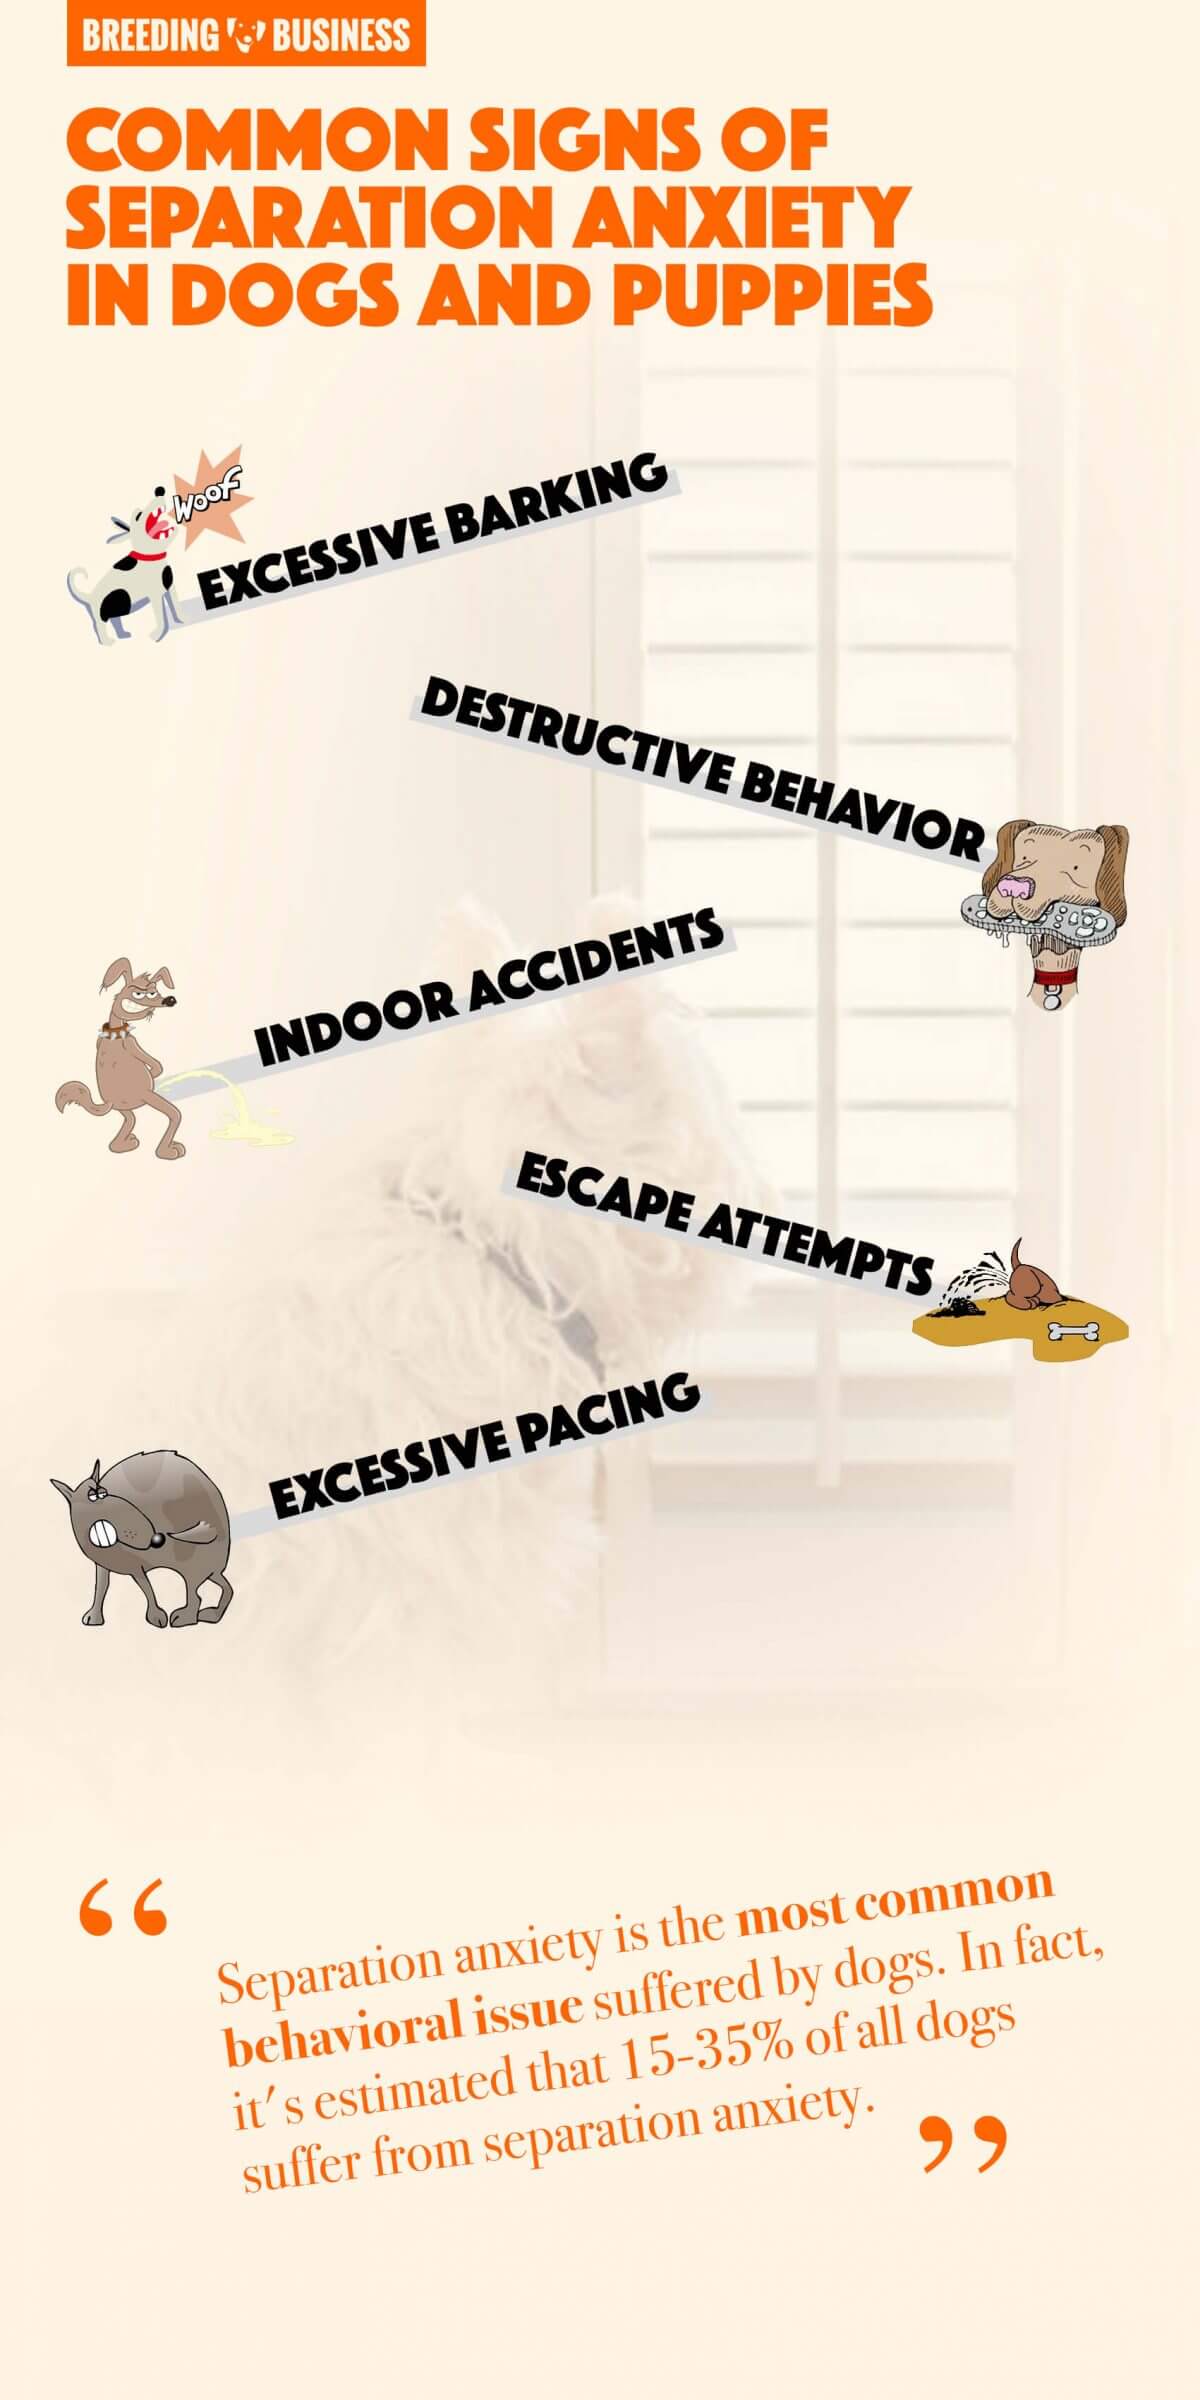 signs of separation anxiety in dogs and puppies (infographic)